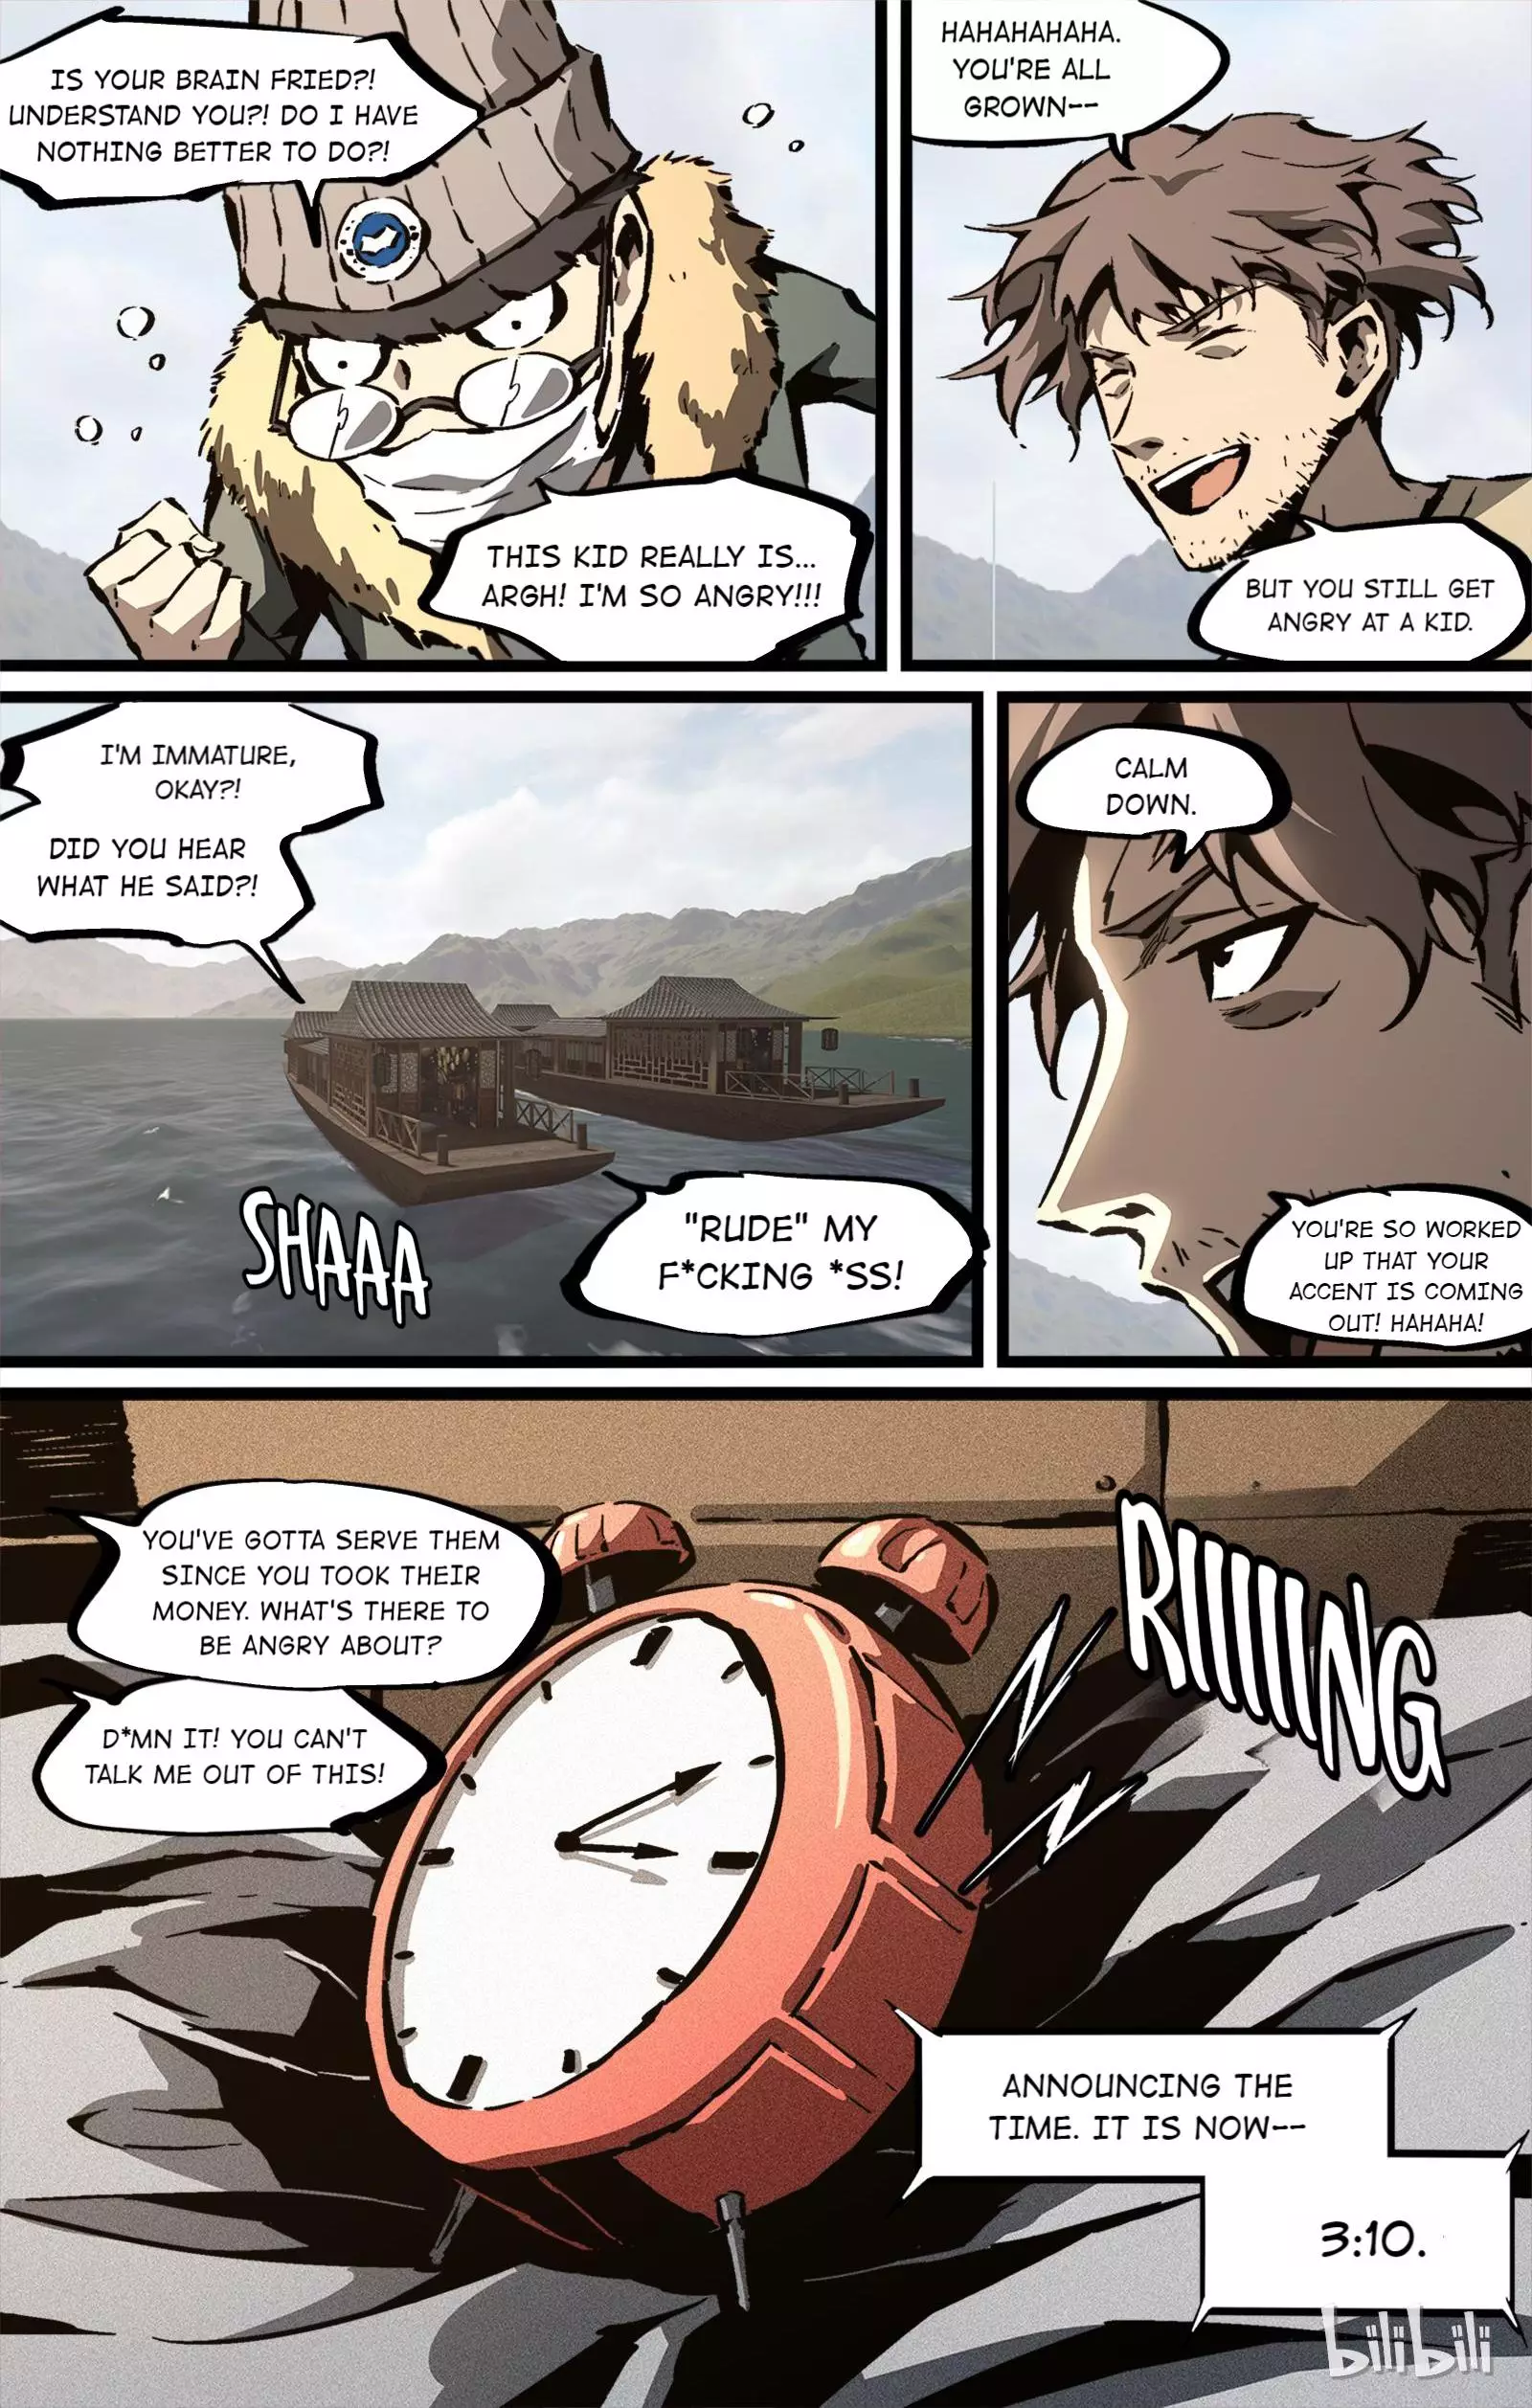 Outlaws - 67 page 12-827eeb82